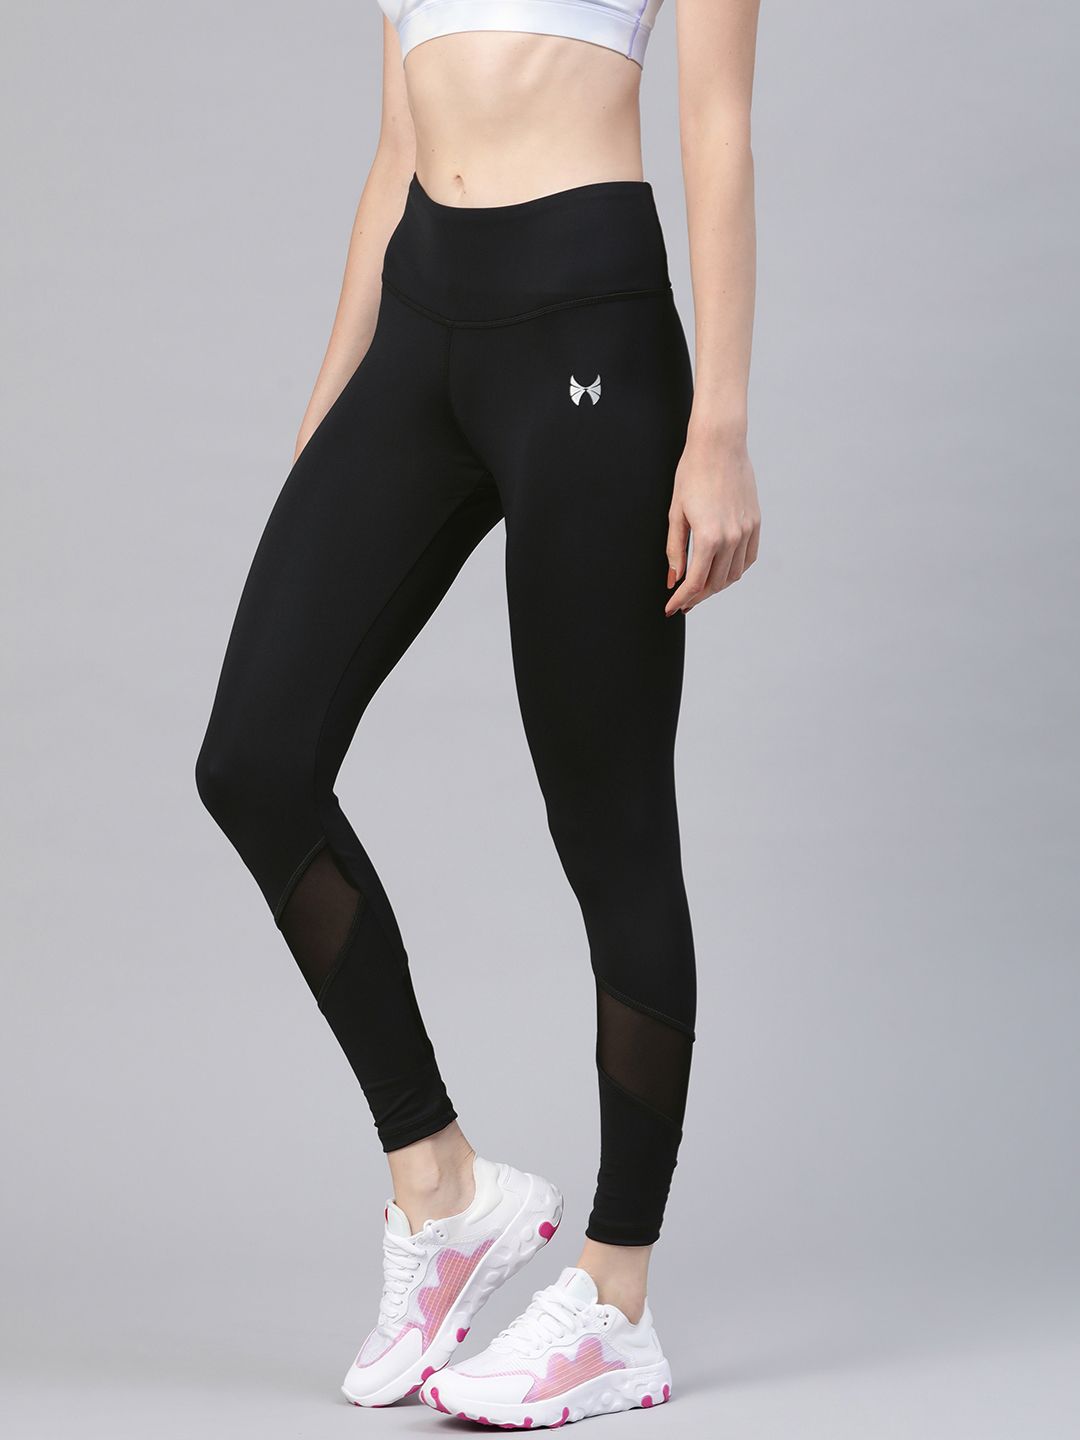 skyria Women Black Solid Workout Tights Price in India